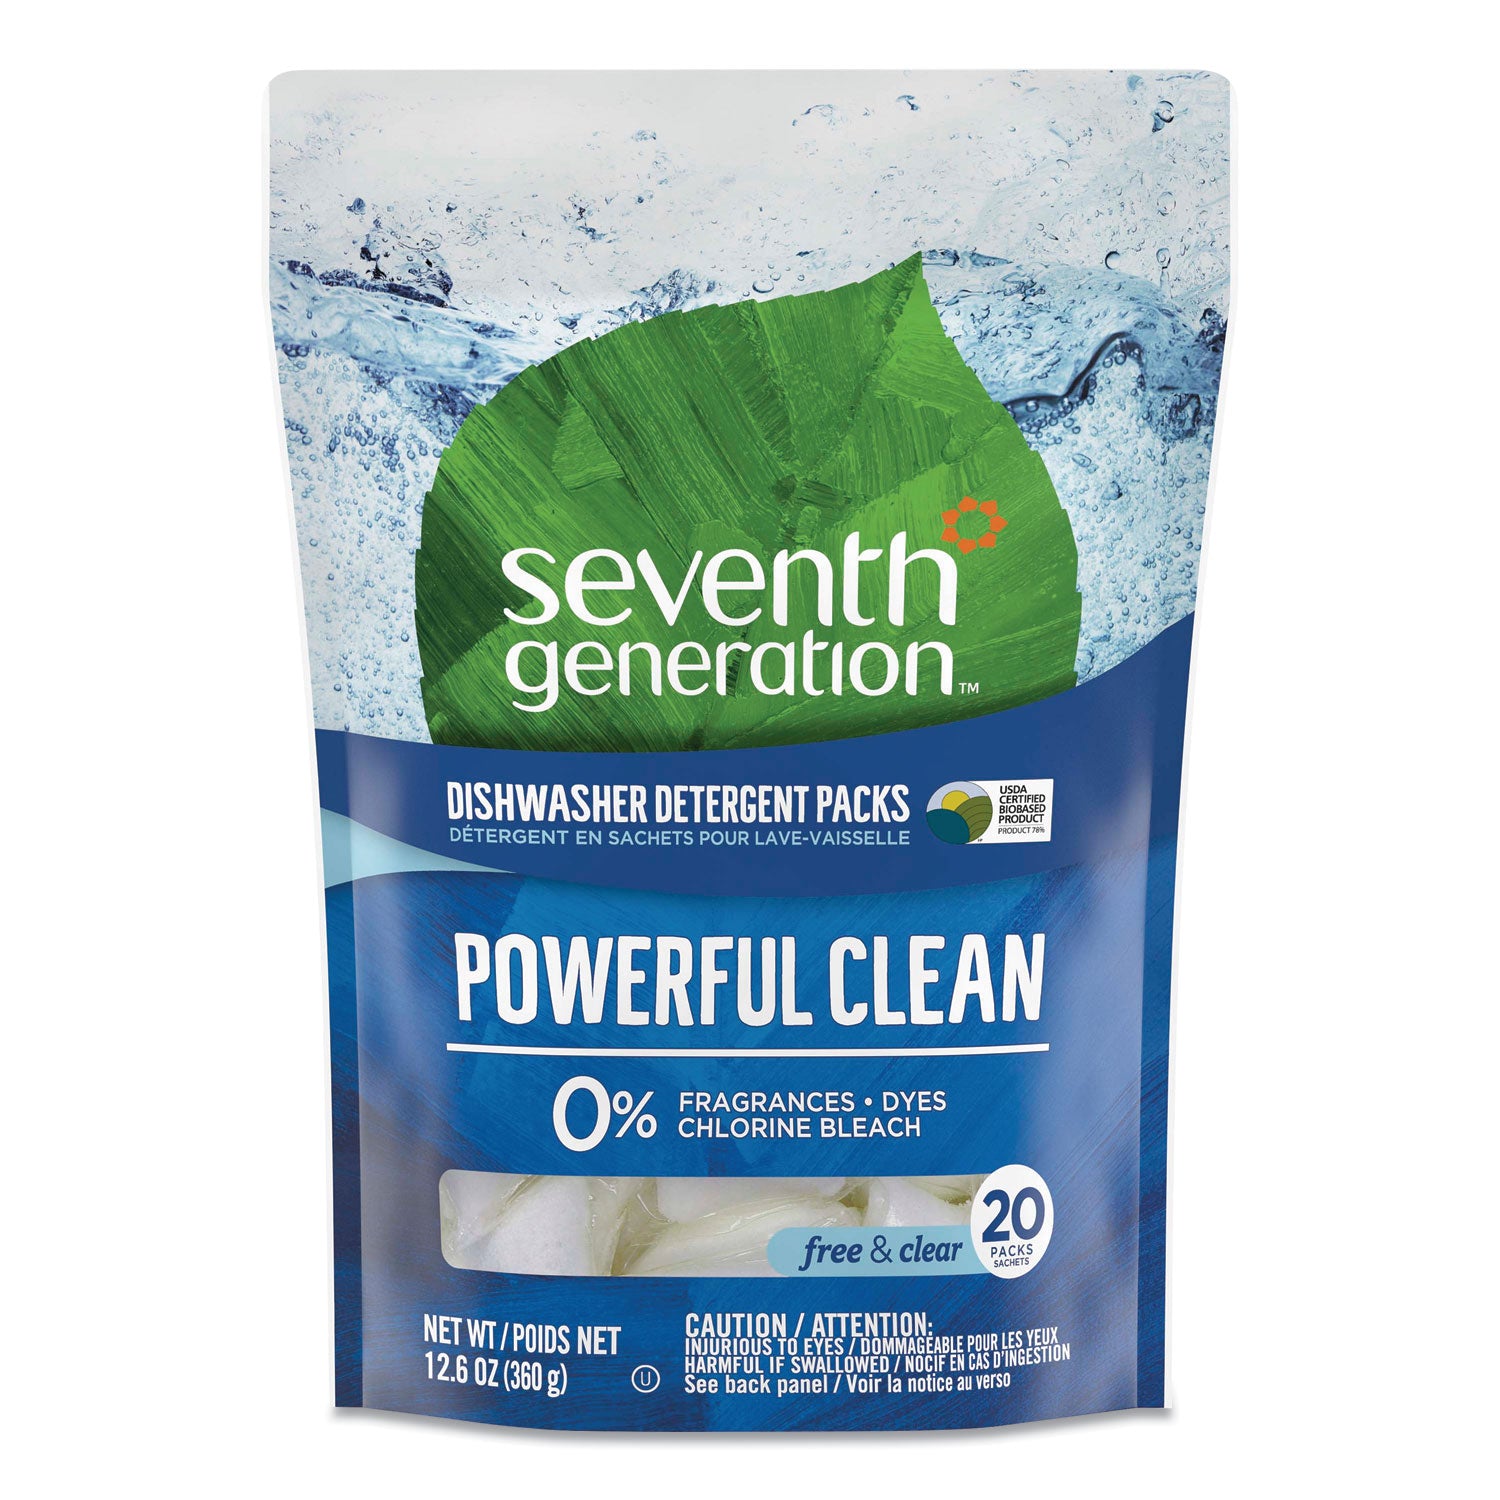 natural-automatic-dishwasher-detergent-packs-free-and-clear-45-powder-packets-box_sev45180ea - 1